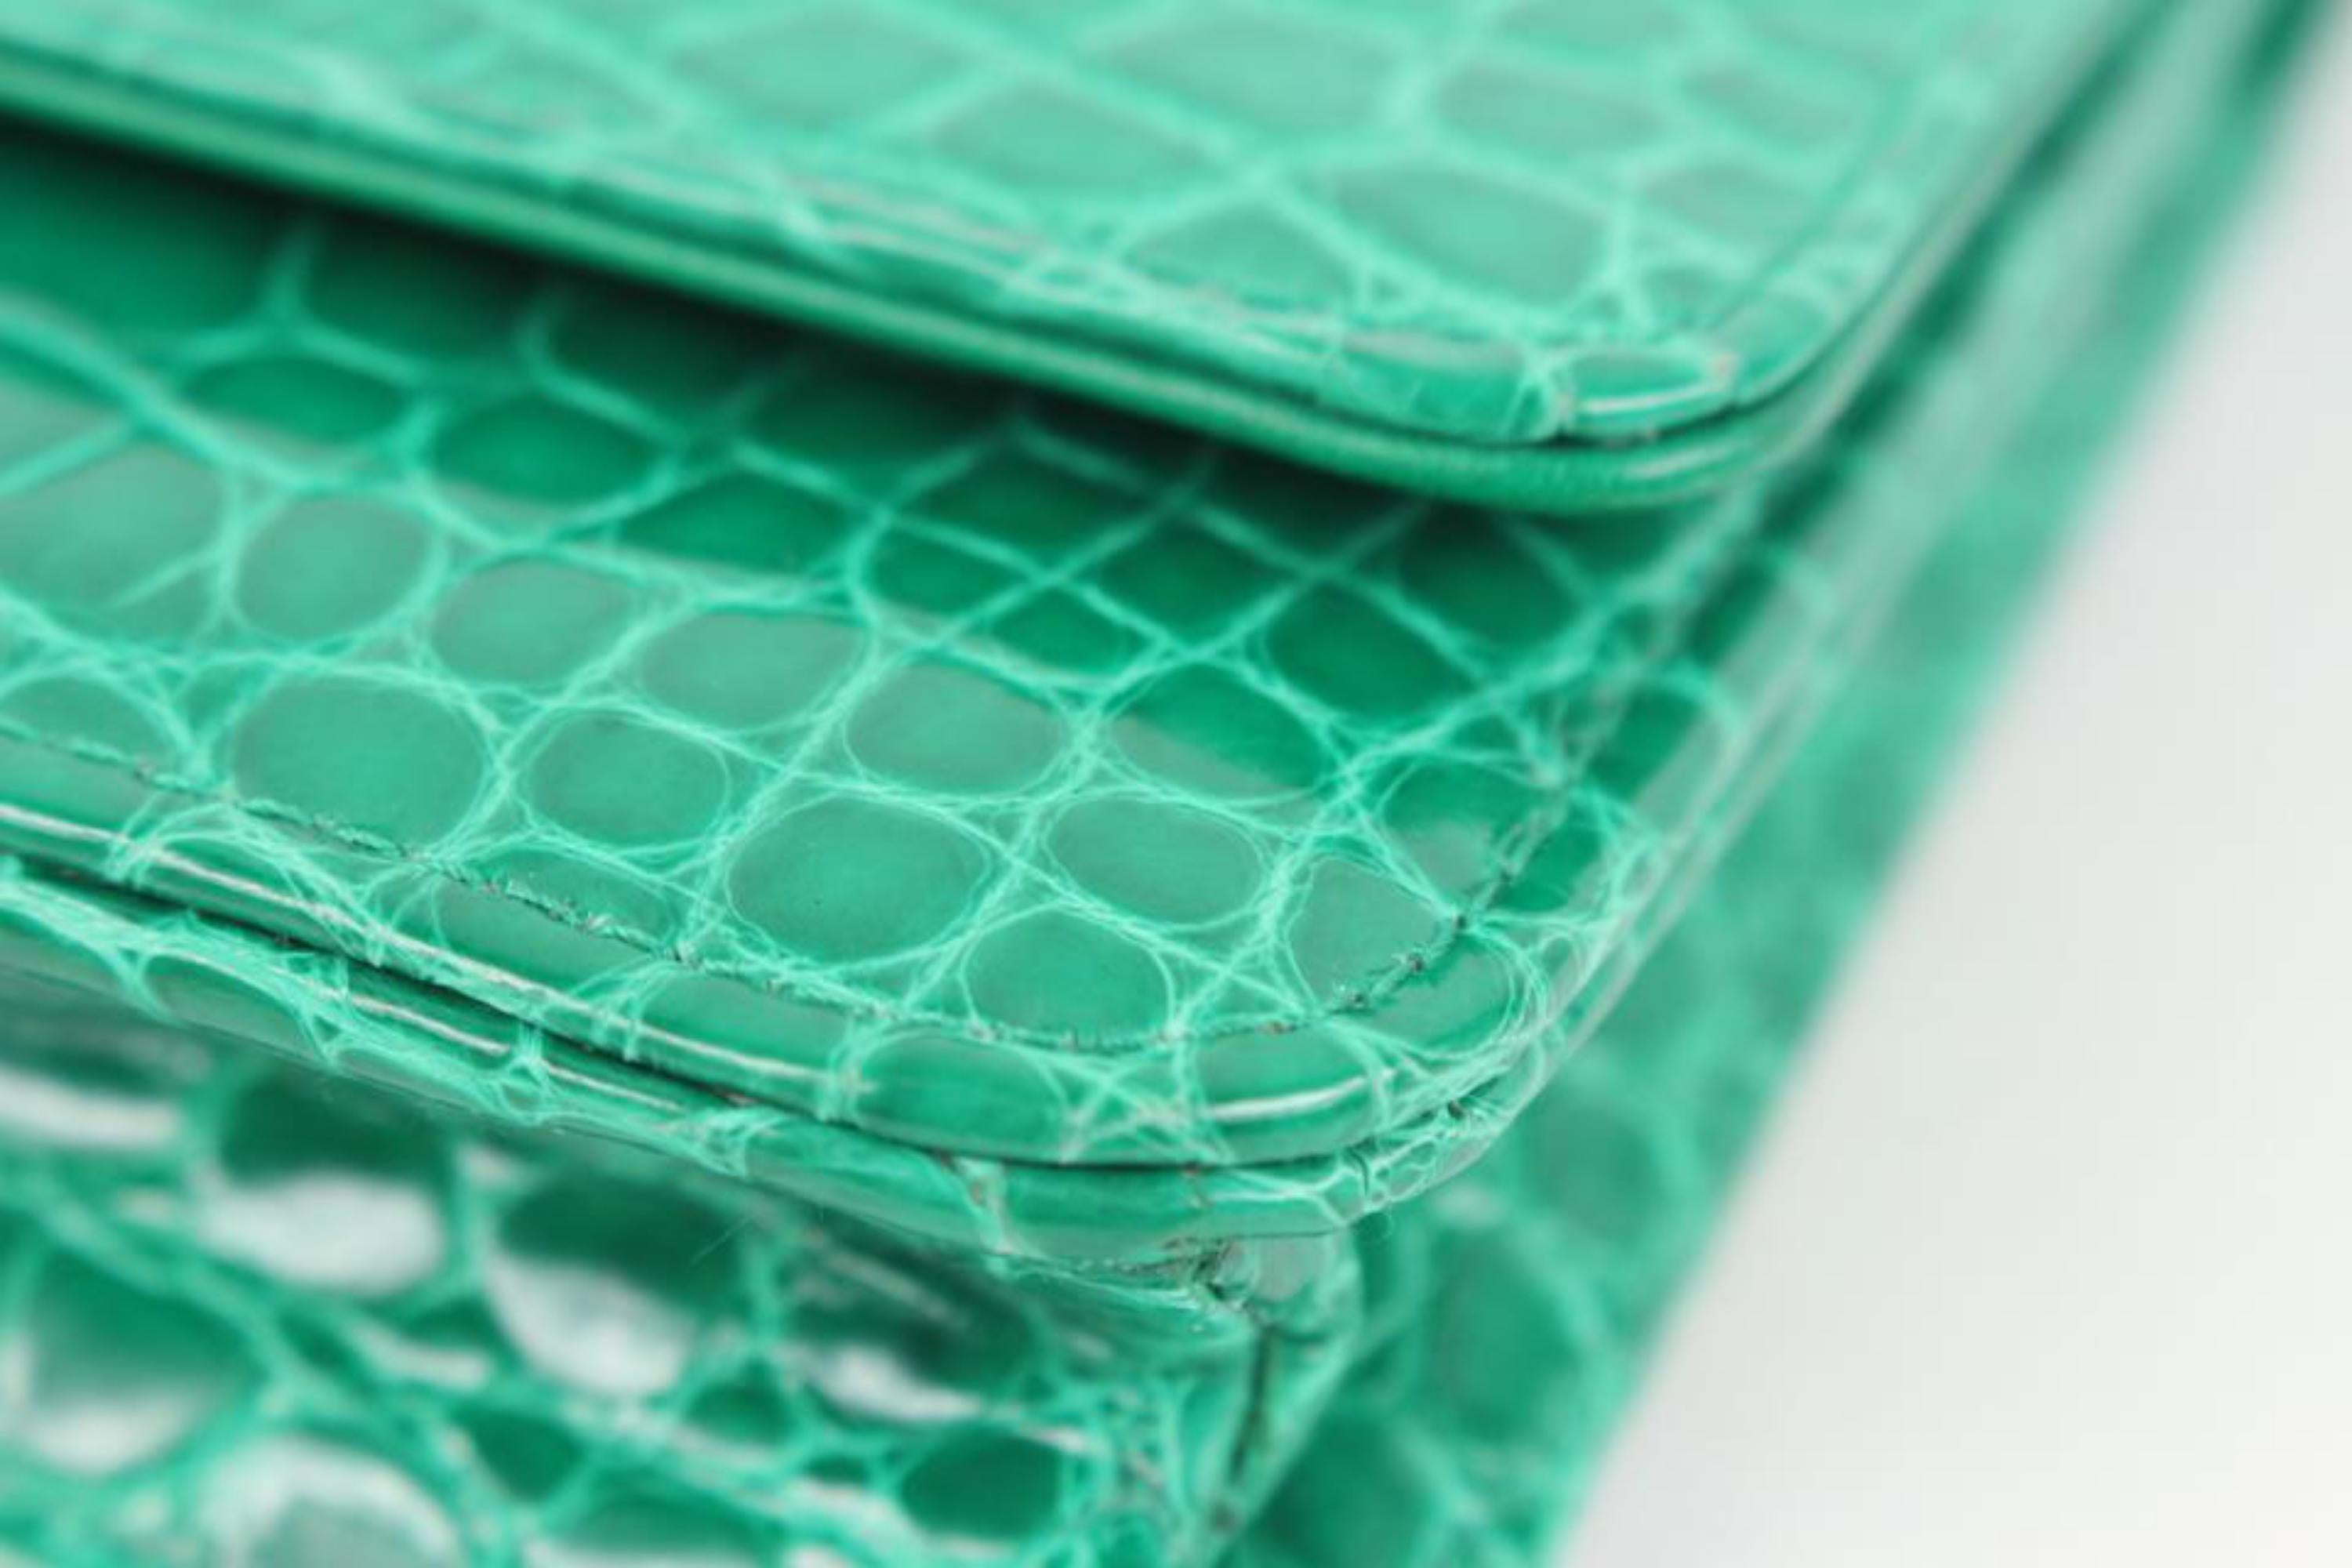 Chanel Ultra Rare Emerald Green Alligator Wallet on Chain SHW WOC 46cz414s For Sale 4